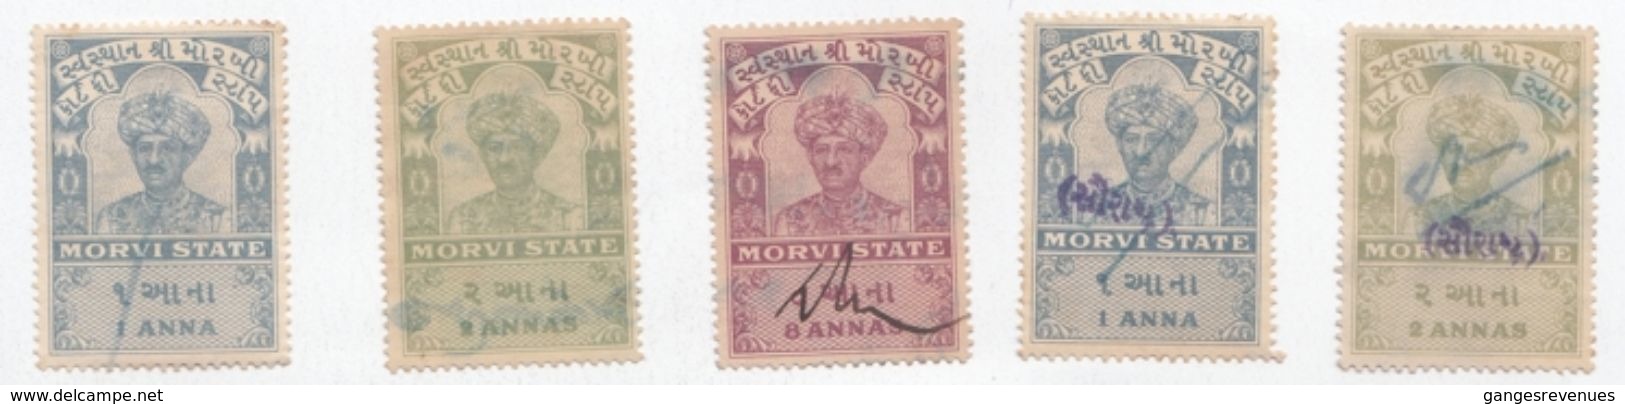 MORVI  State  1A TO 8A 5 Court Fee & Revenue  Stamps Type 9  # 04725  FD  Inde Indien  India Fiscaux Fiscal - Morvi